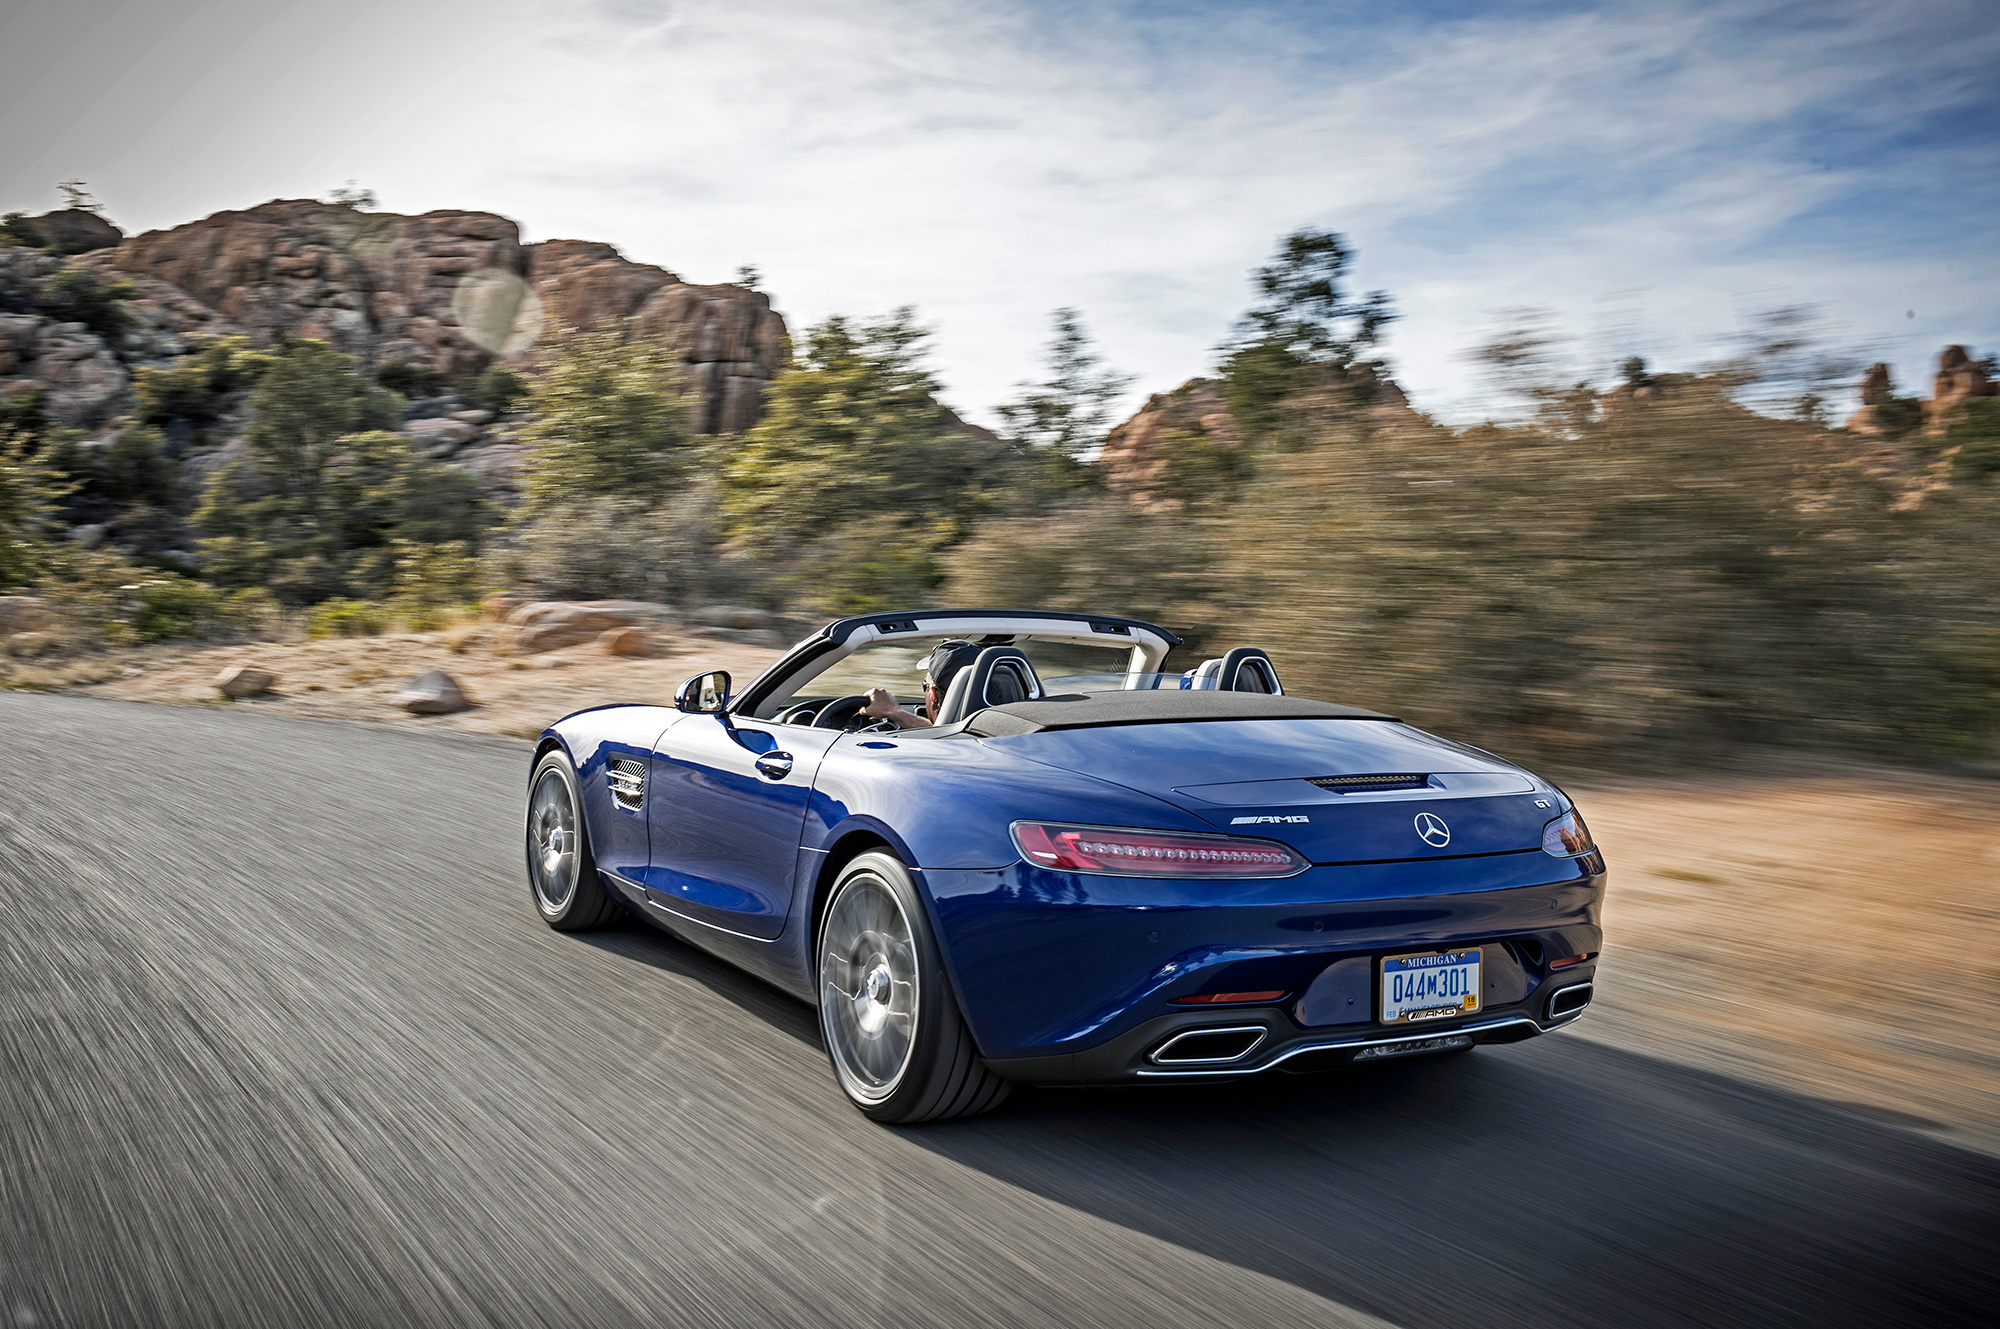 Mercedes AMG GT C Roadster Wallpapers Images Photos